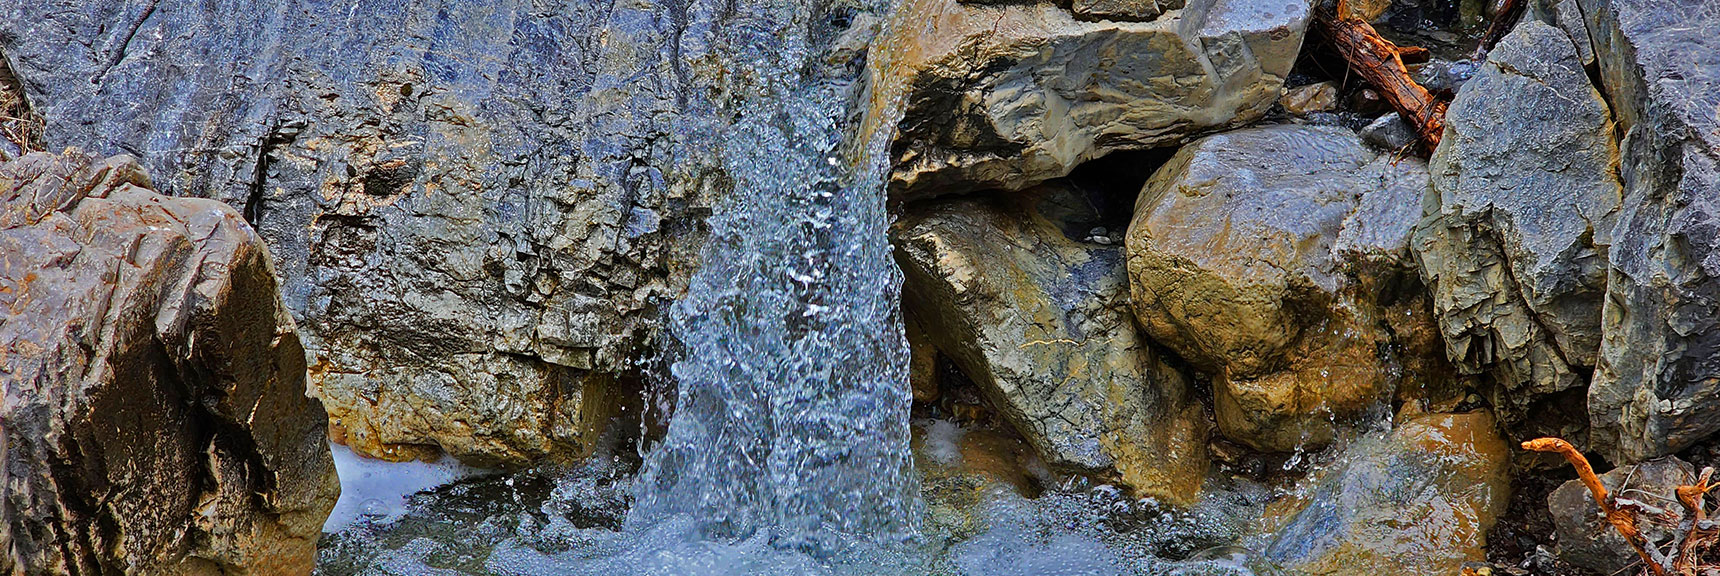 Falling Water Radiates Energy, Beauty and Music | Fletcher Canyon Trail | Mt Charleston Wilderness | Spring Mountains, Nevada